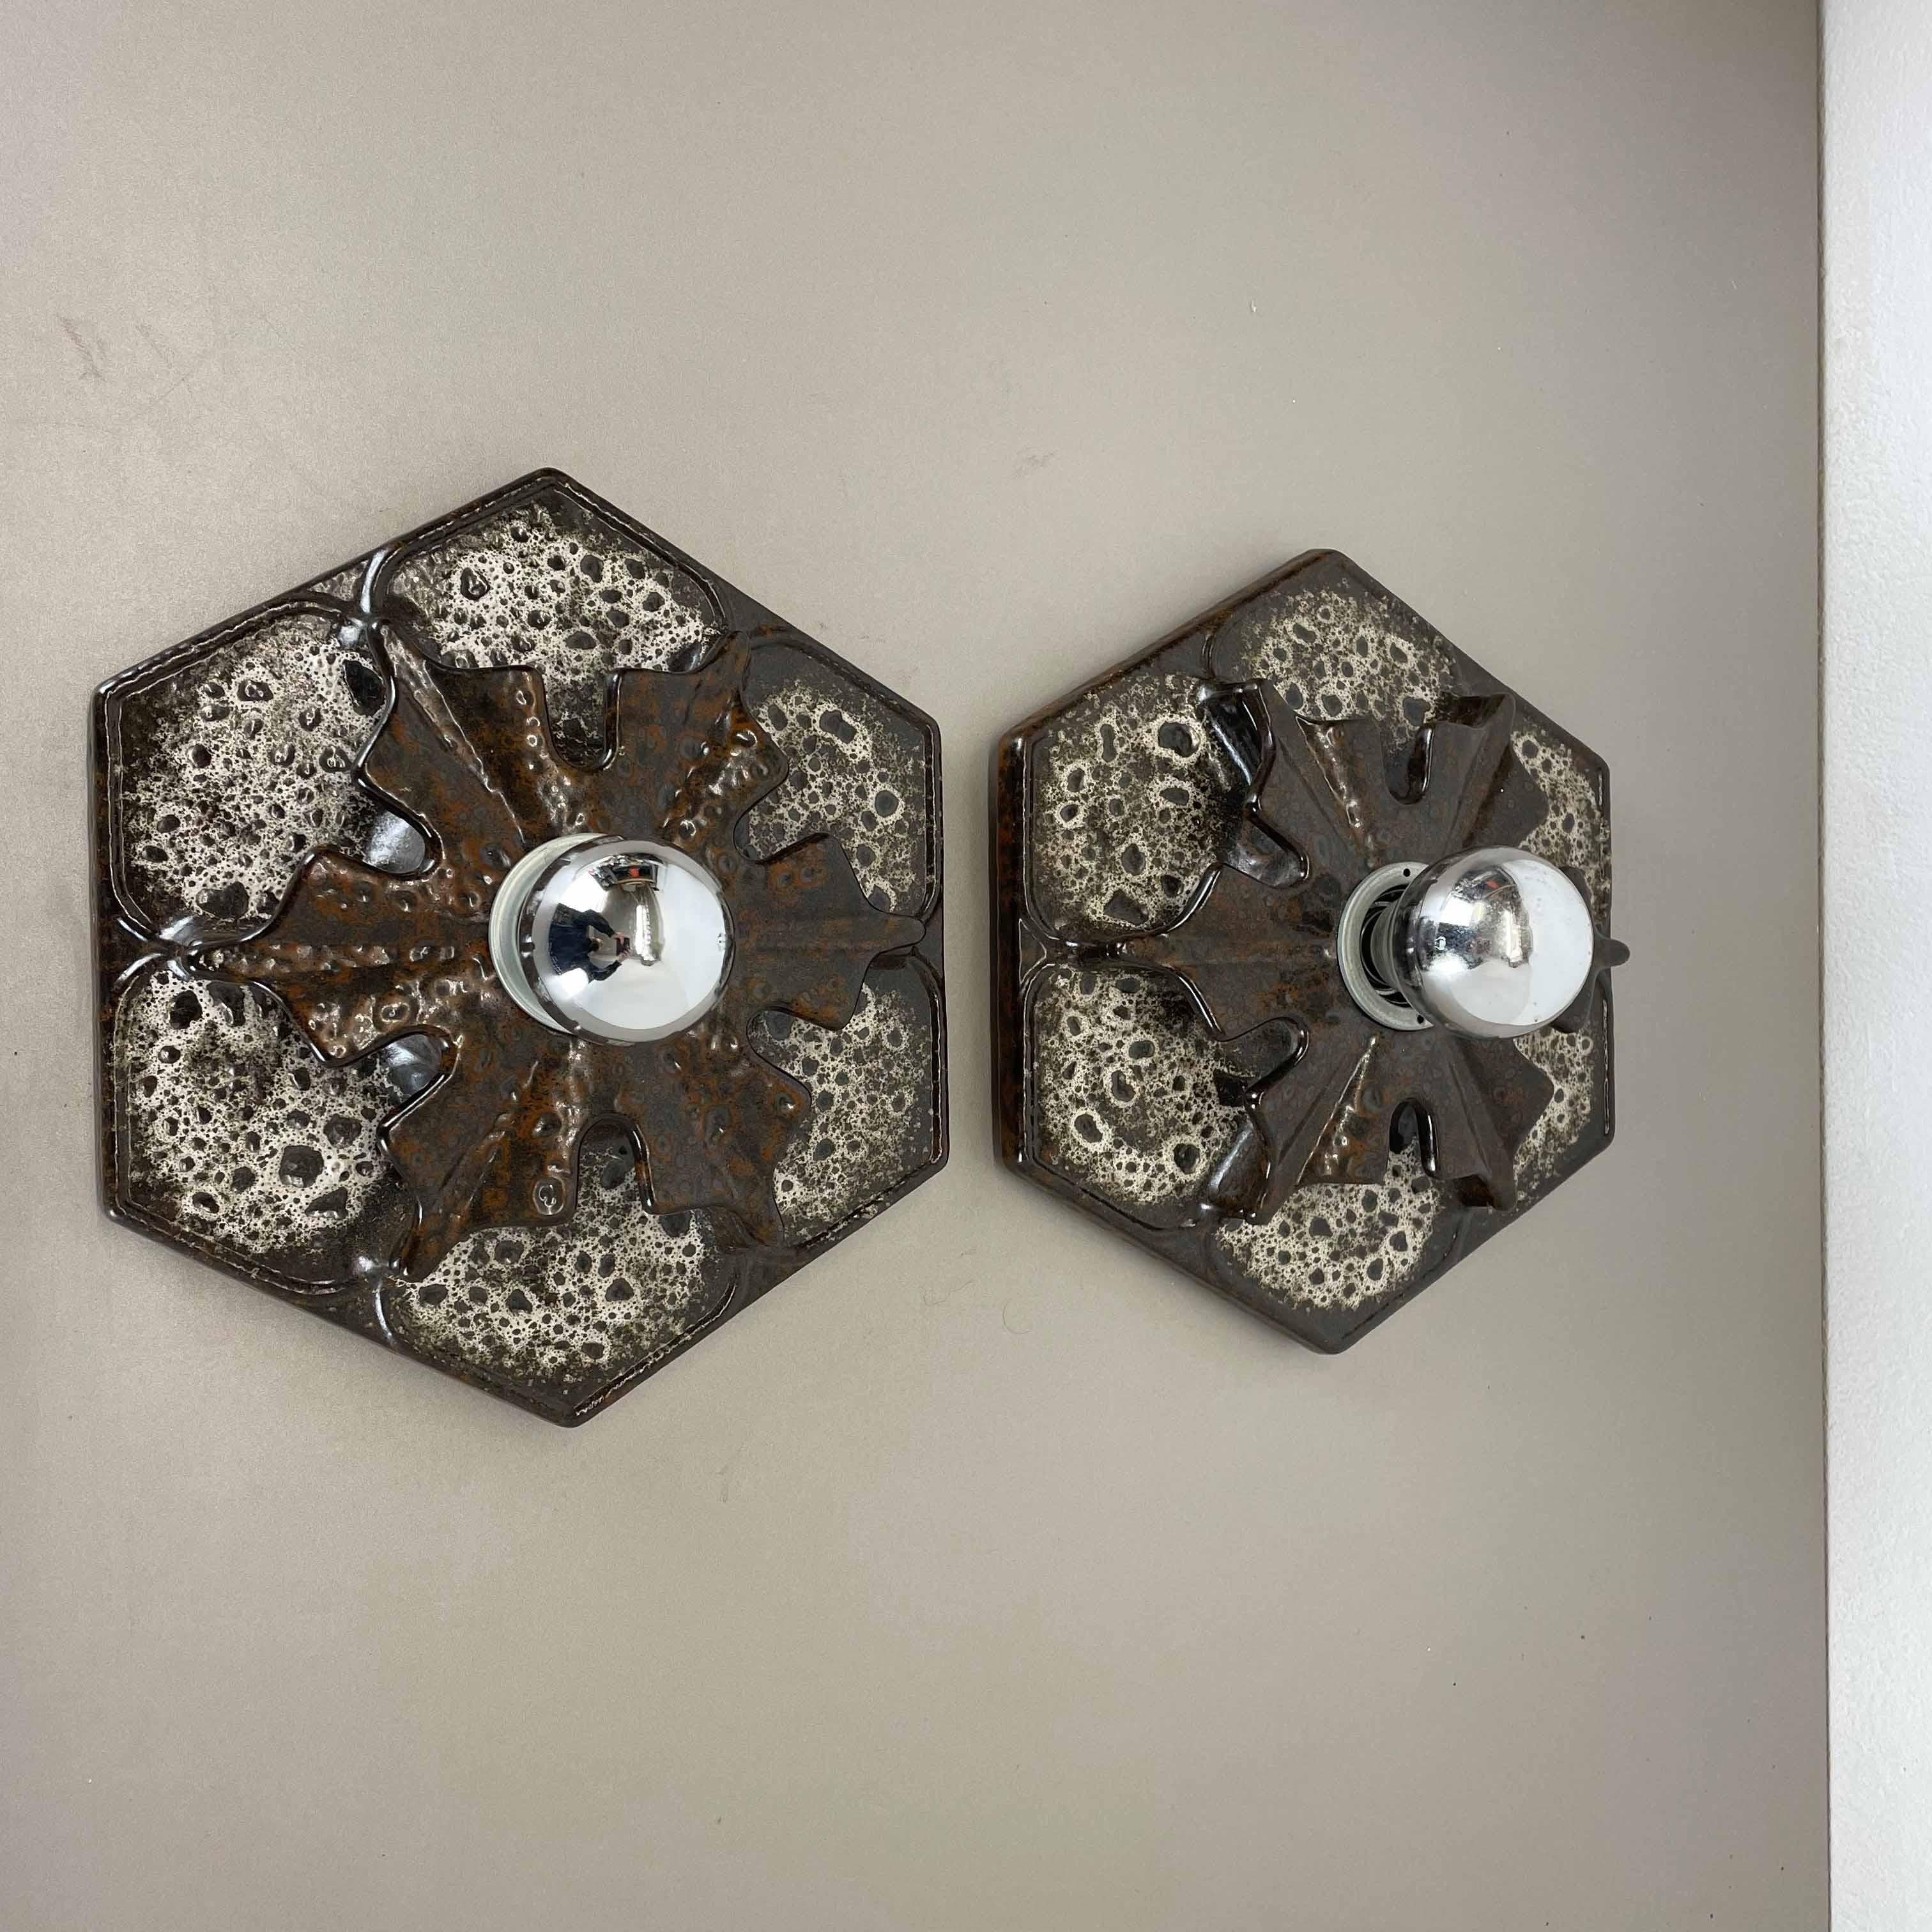 Article:

Wall light sconce set of two.


Producer:

Pan Ceramic, Germany.



Origin:

Germany.



Age:

1970s.



Description:

Original 1960s modernist German wall light made of ceramic in fat lava optic. This super rare